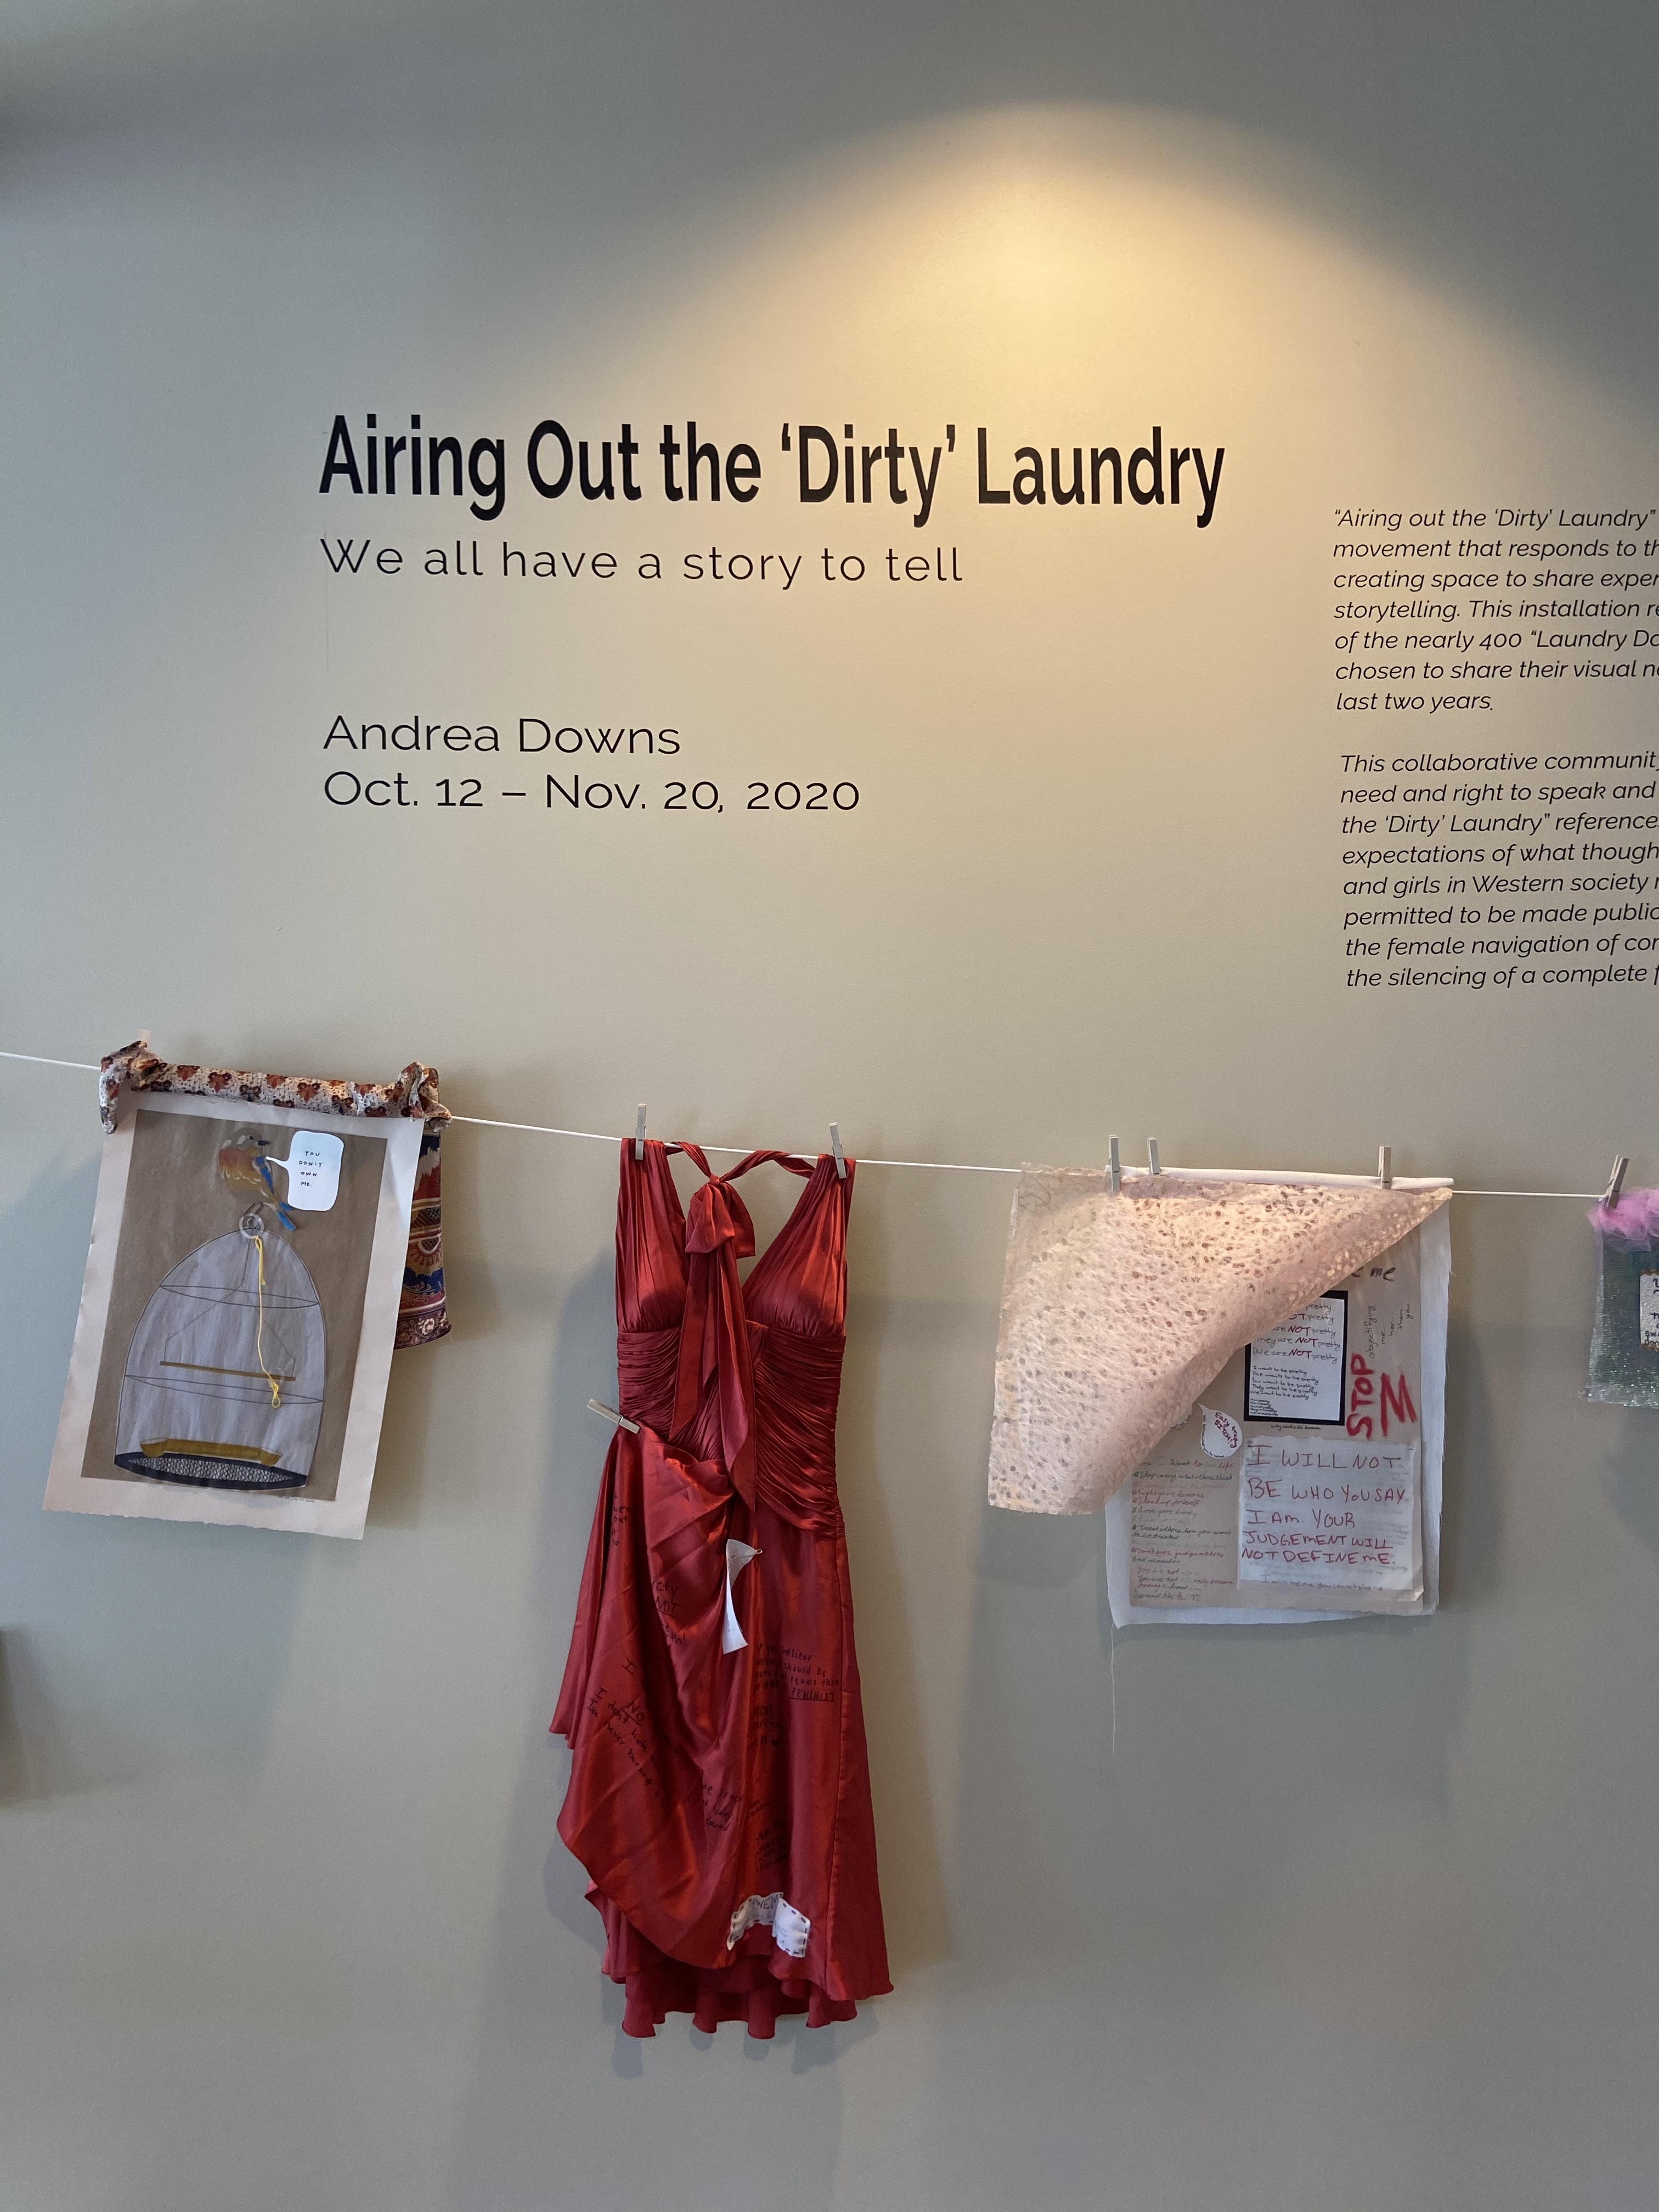 Airing out the Dirty Laundry, an art movement